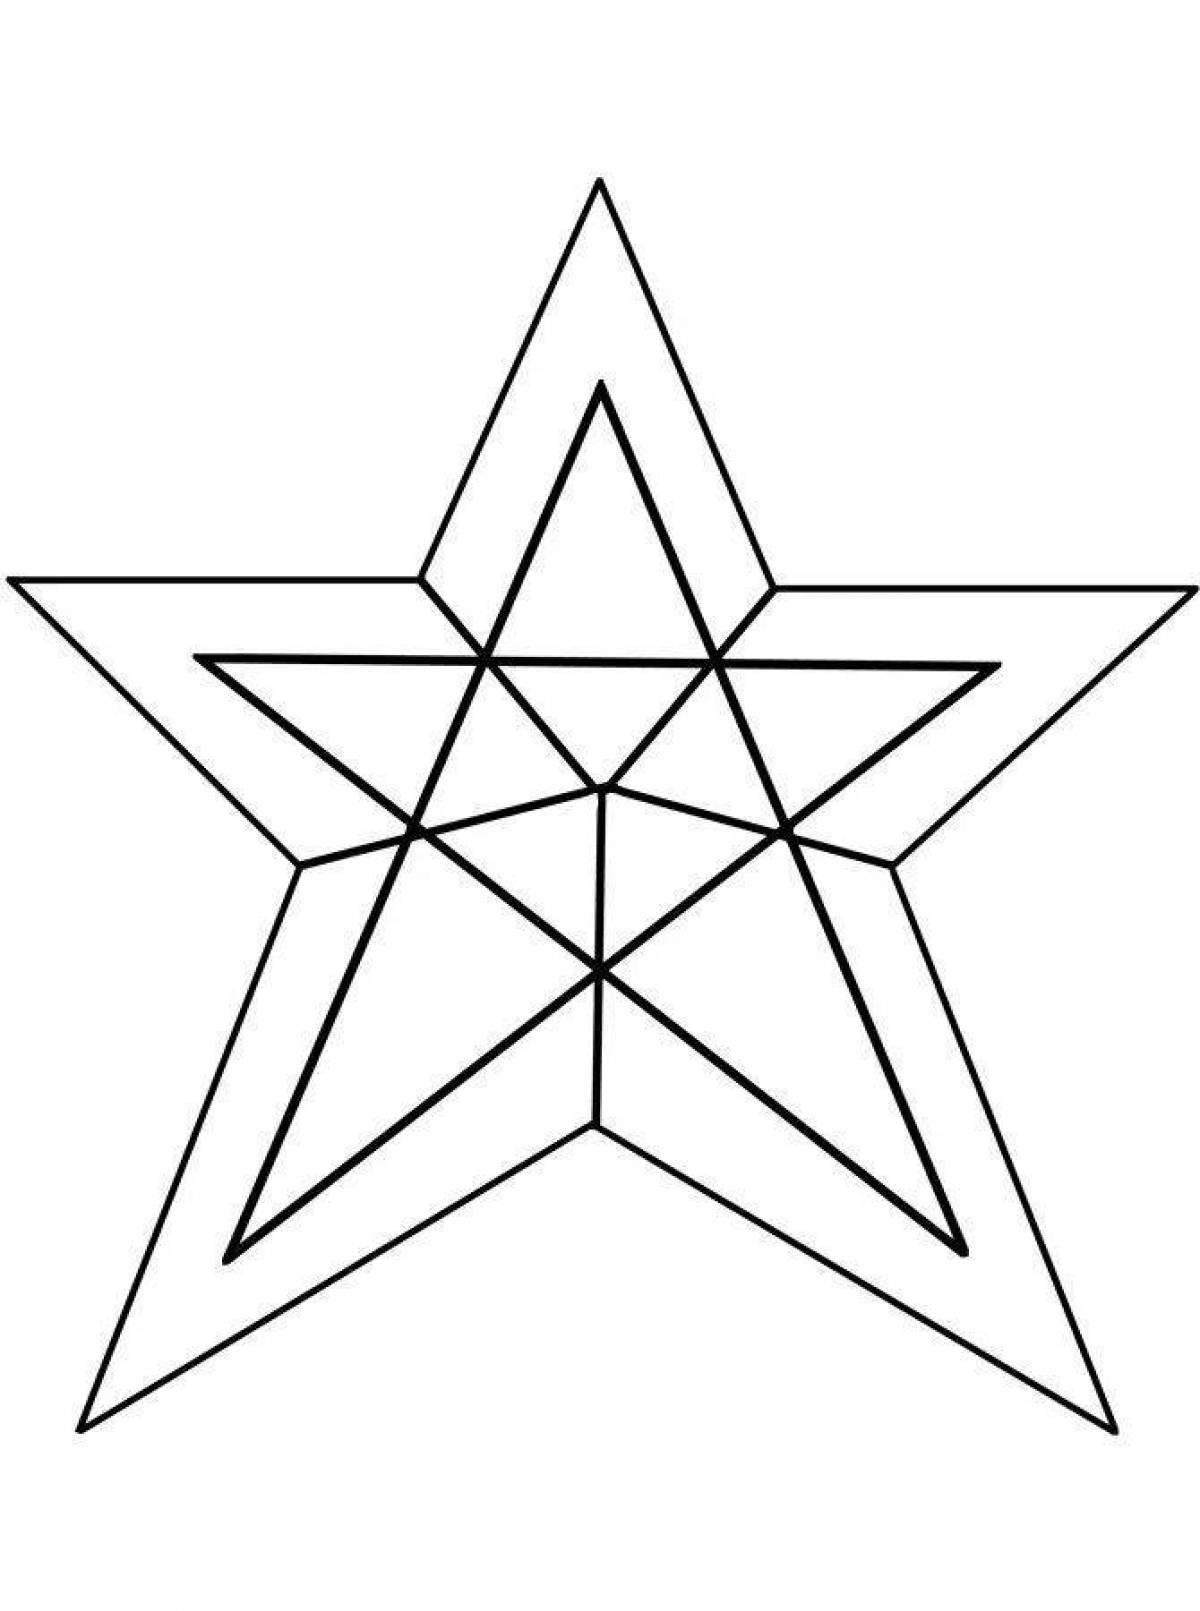 Five-pointed star #2